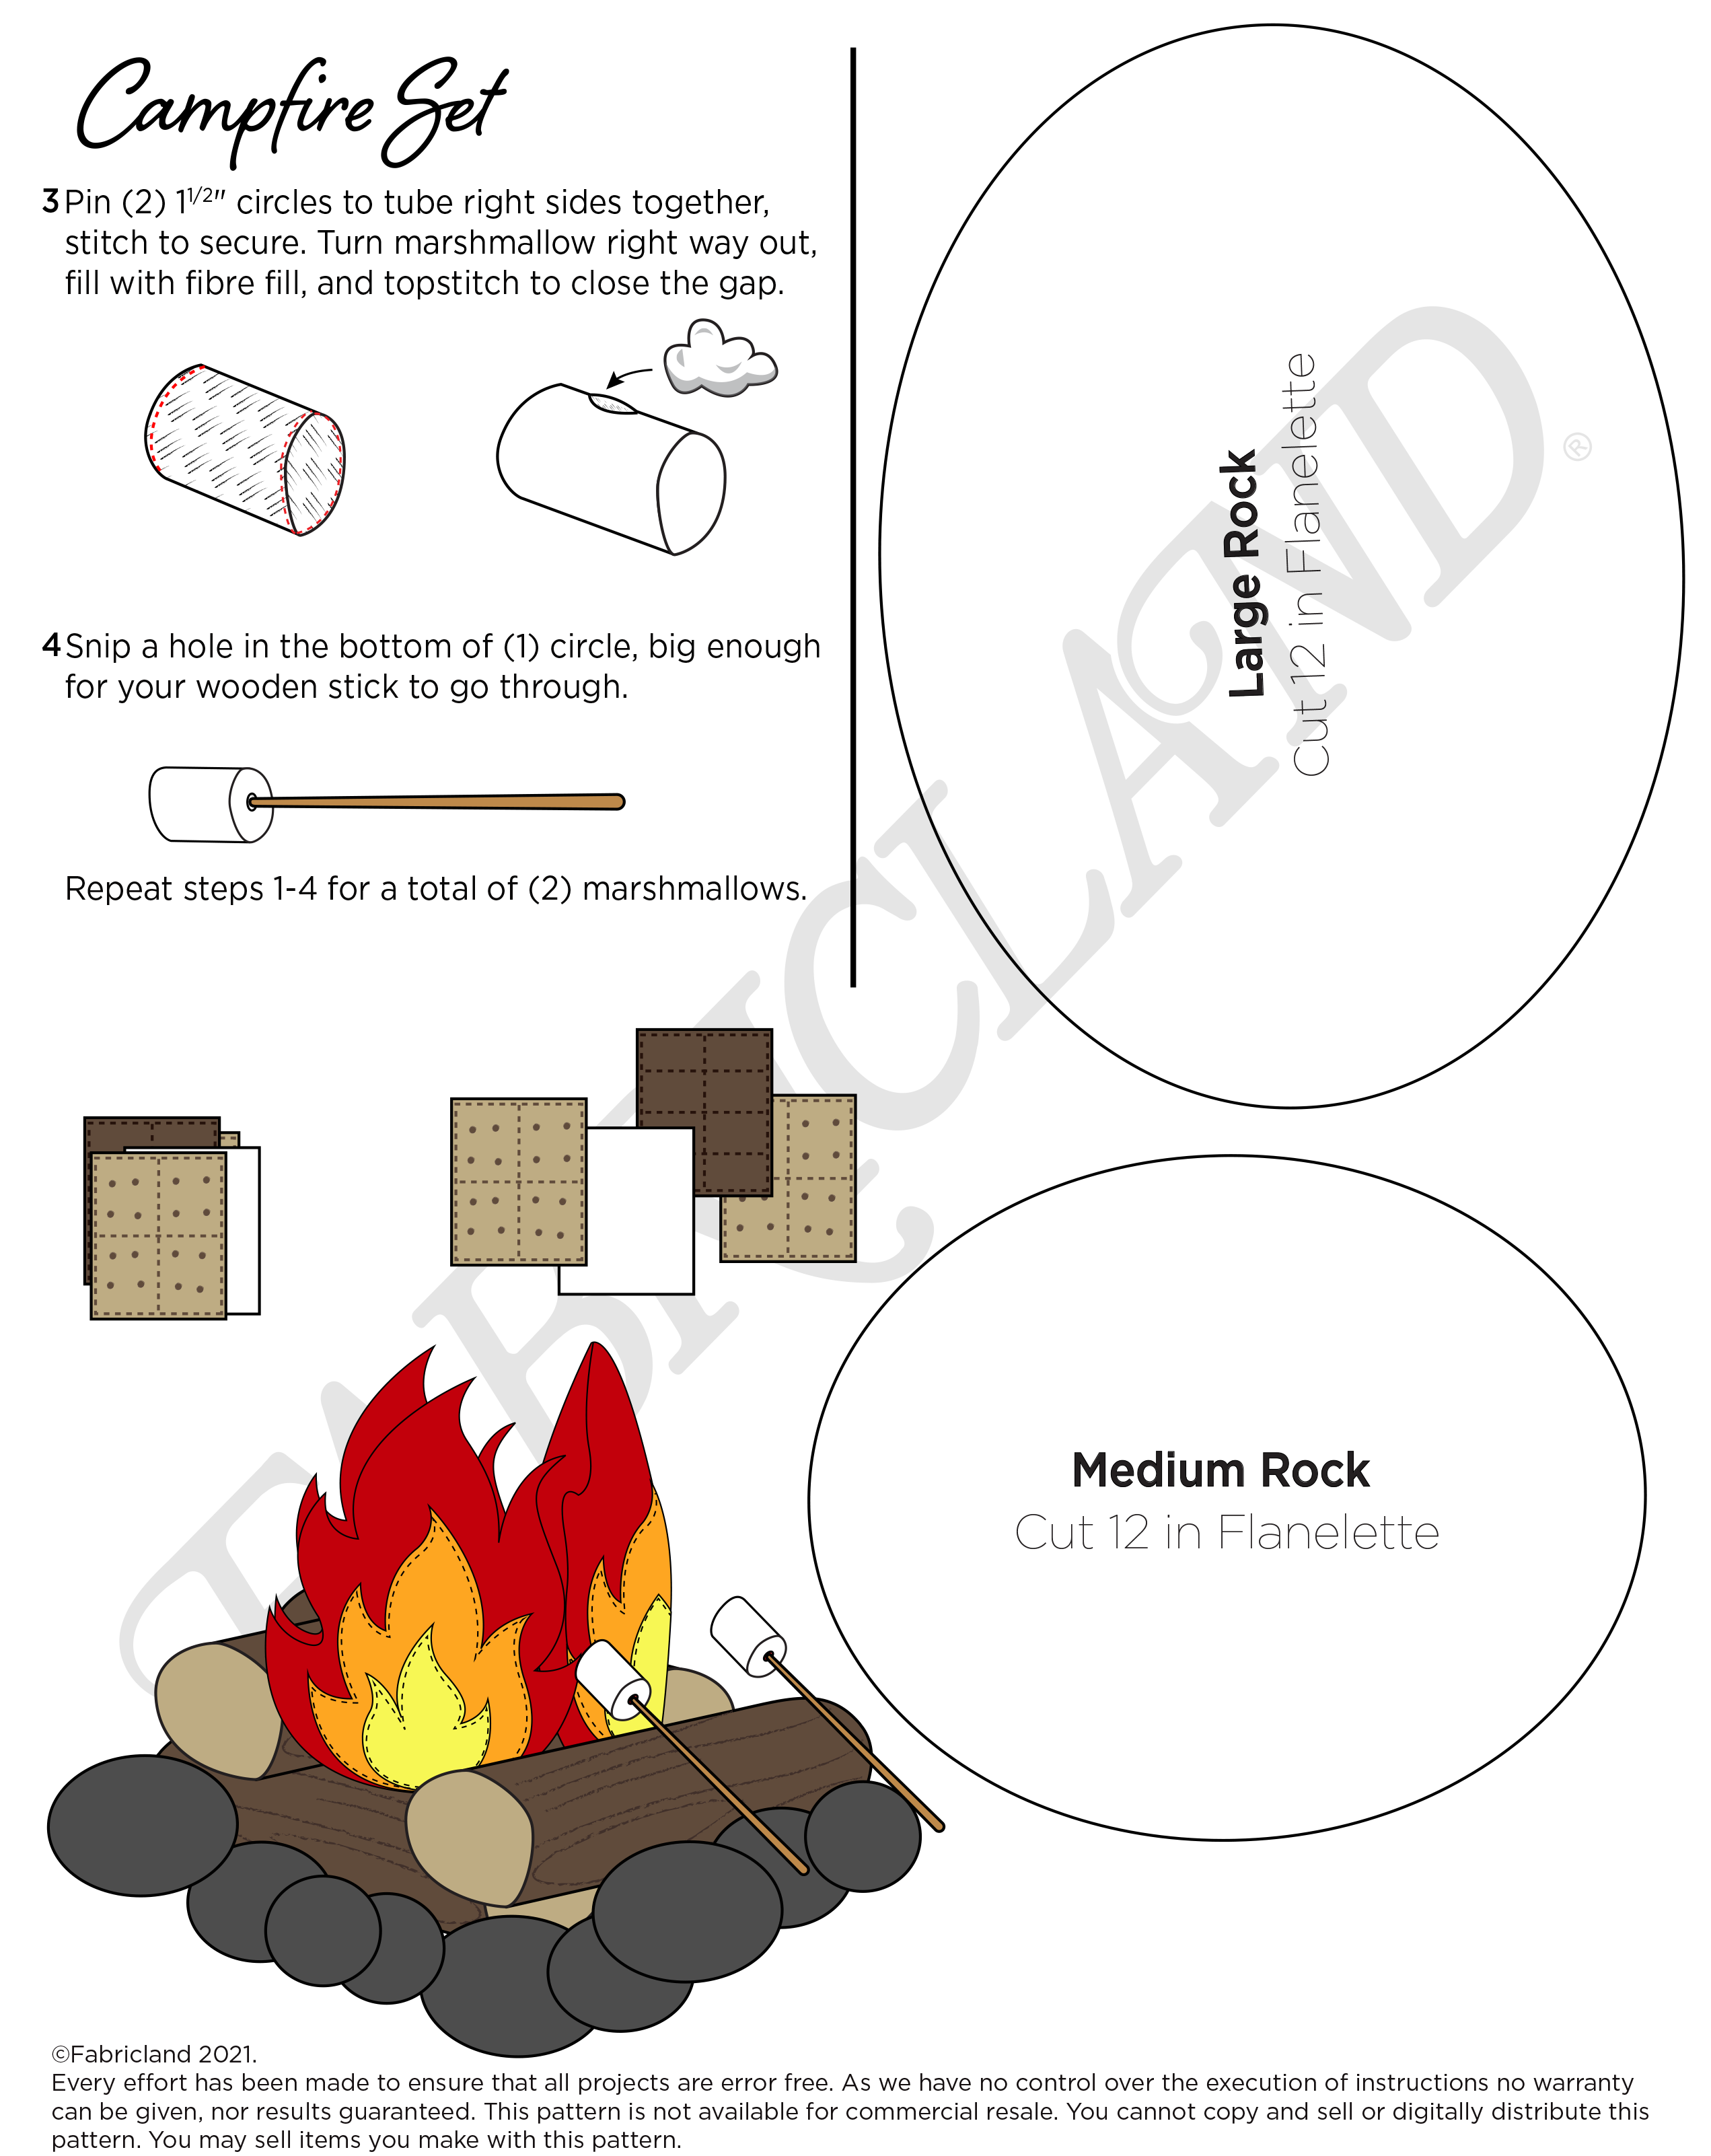 Second set of steps to creating your own campfire craft